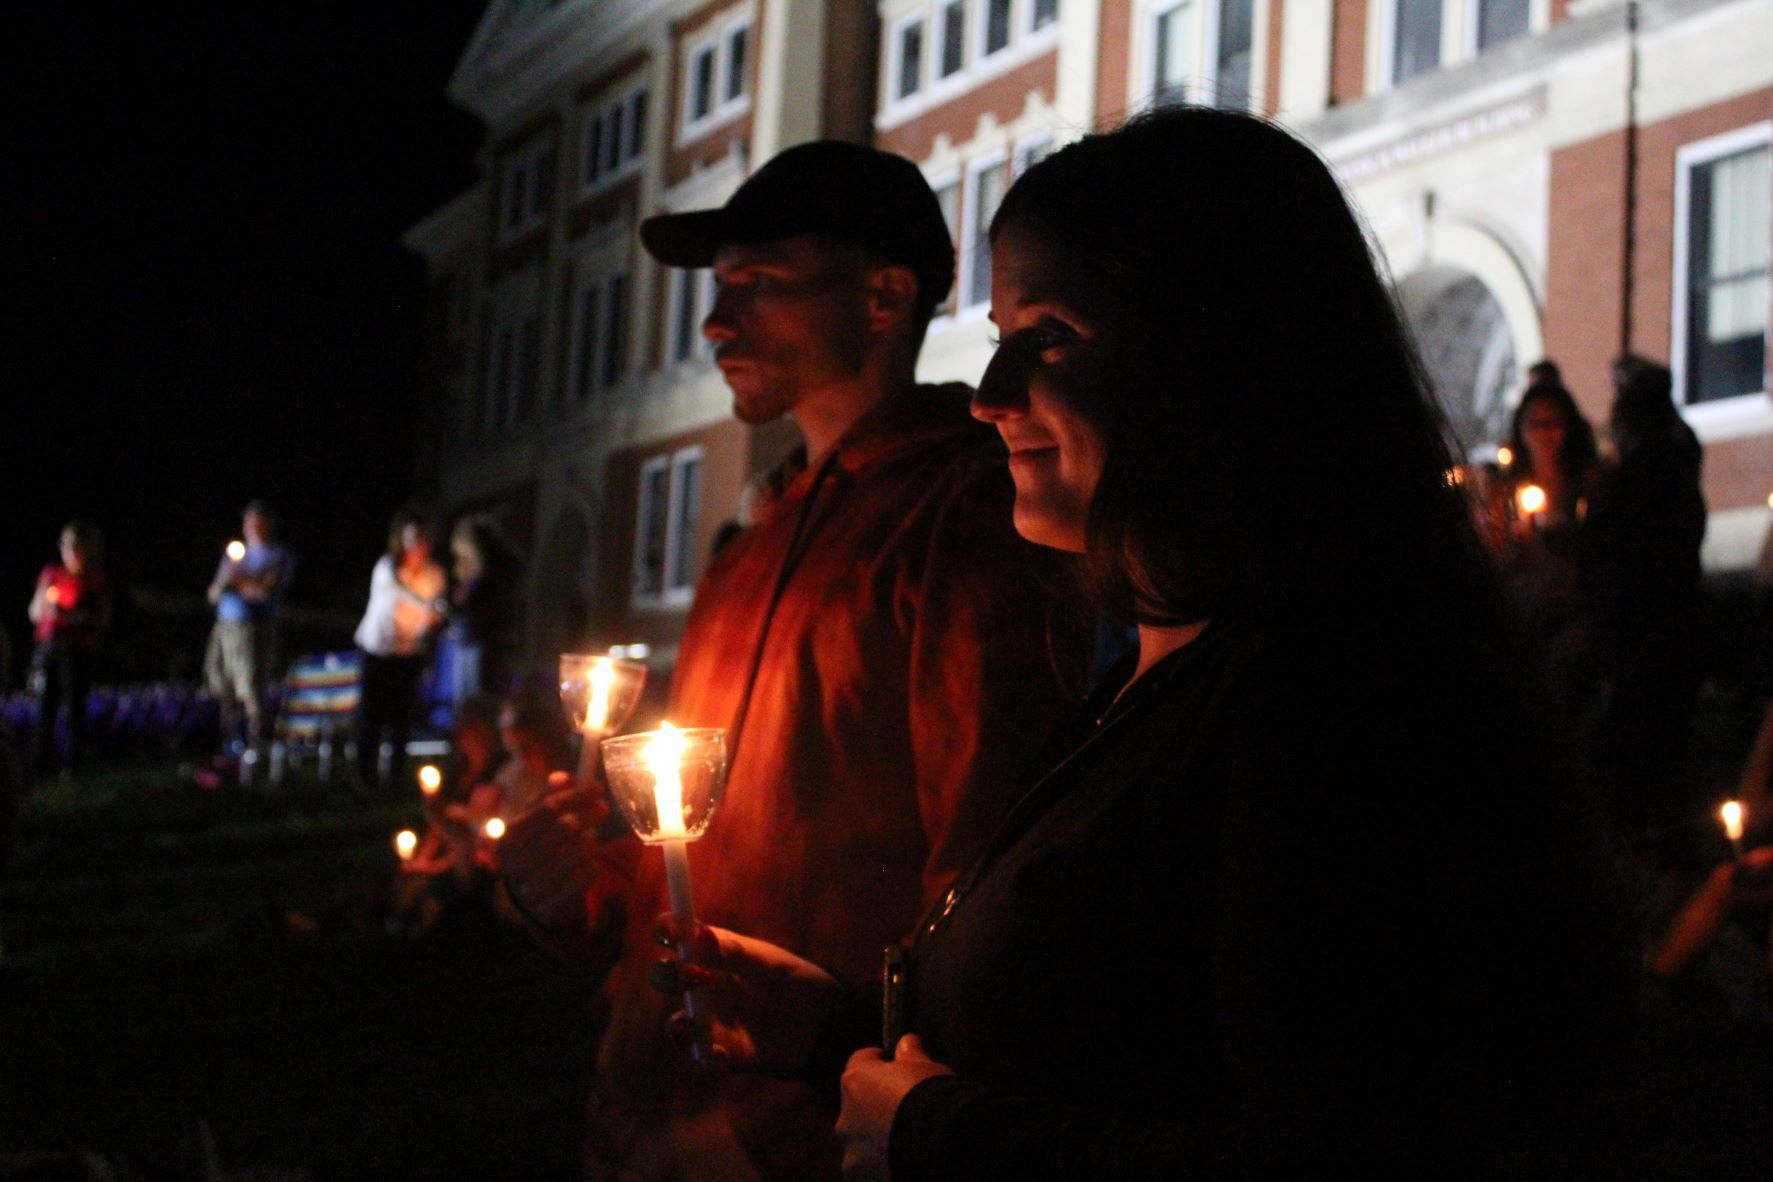 People hold candles in front of the Walker Building.